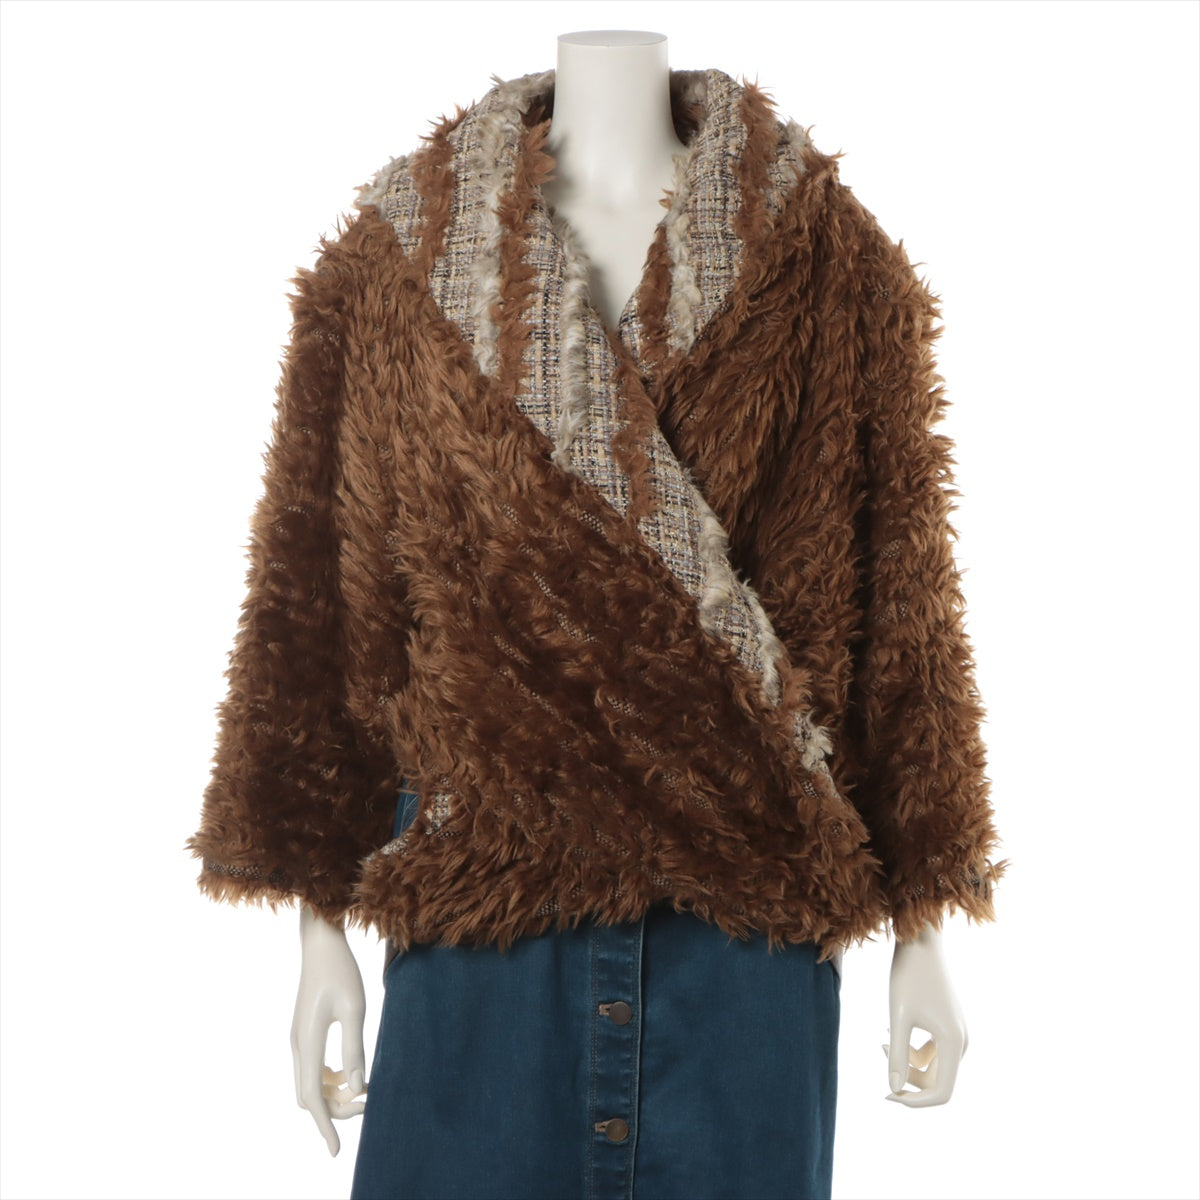 Chanel Coco Button P39 wool x acrylic Jacket 40 Ladies' Brown  P39507 belted Faux fur Buckle parts missing